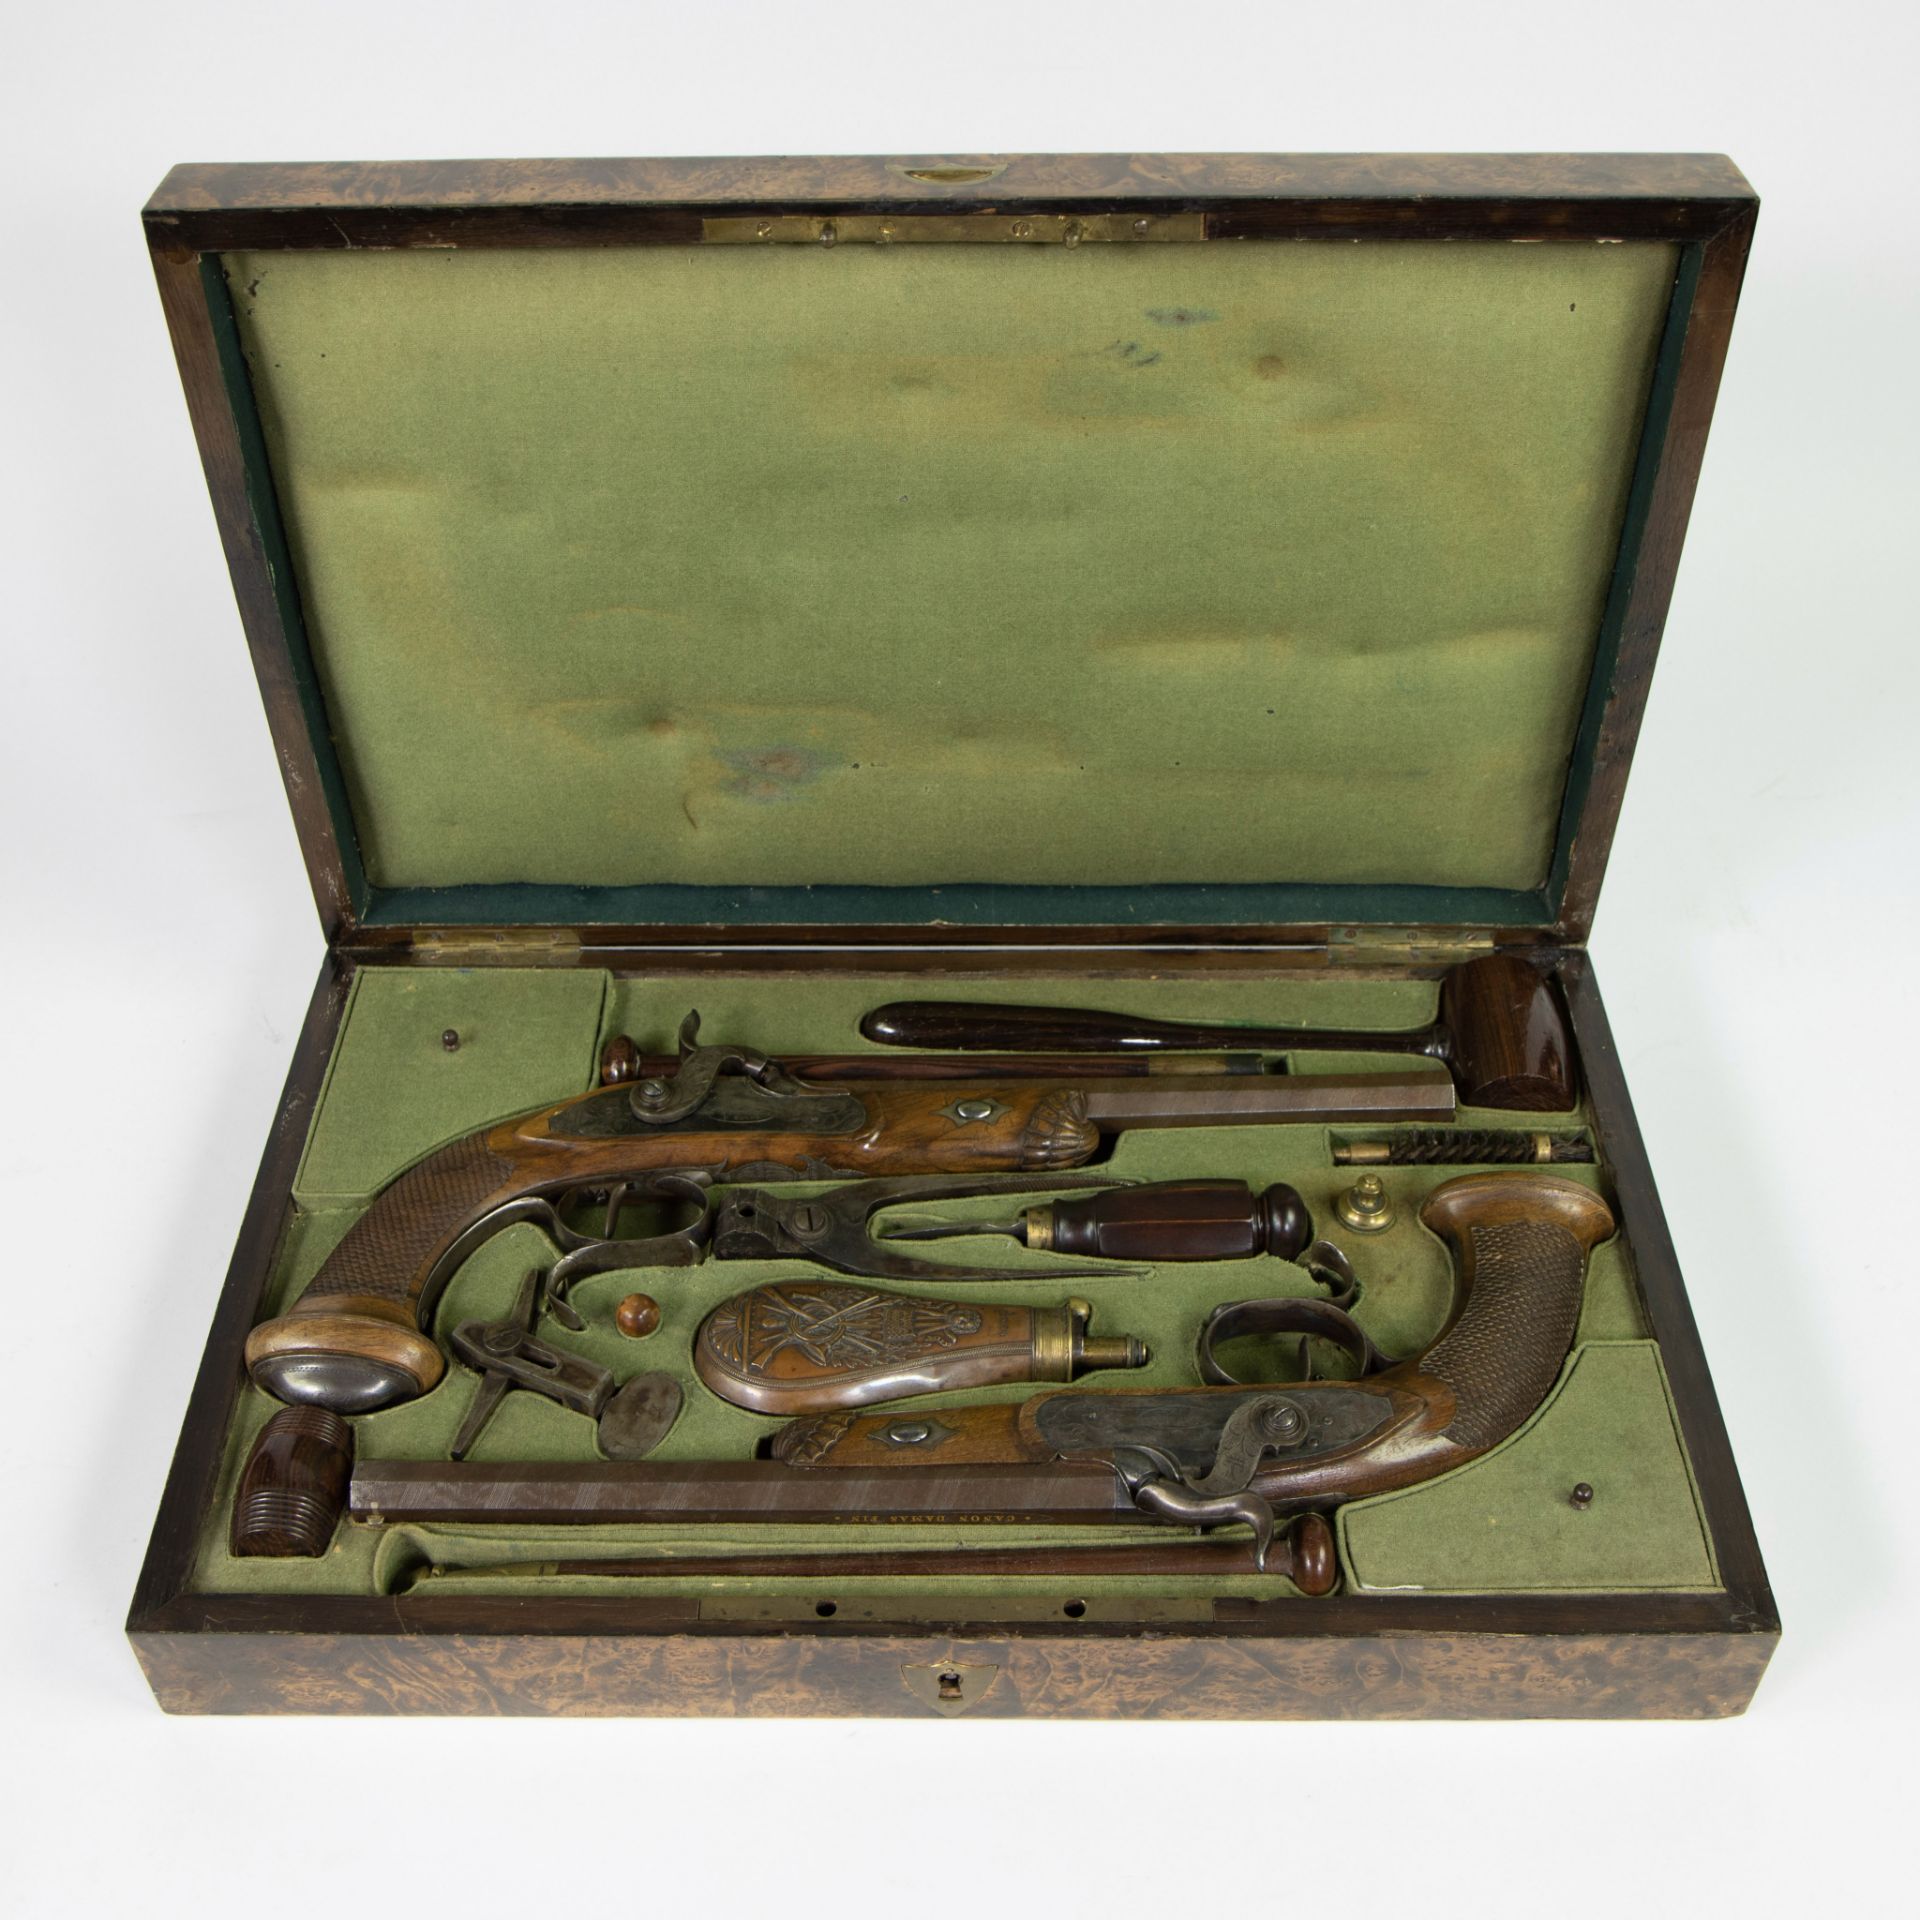 Box with dueling pistols and accessories, engraved Garault à Tours, Canon damas fin